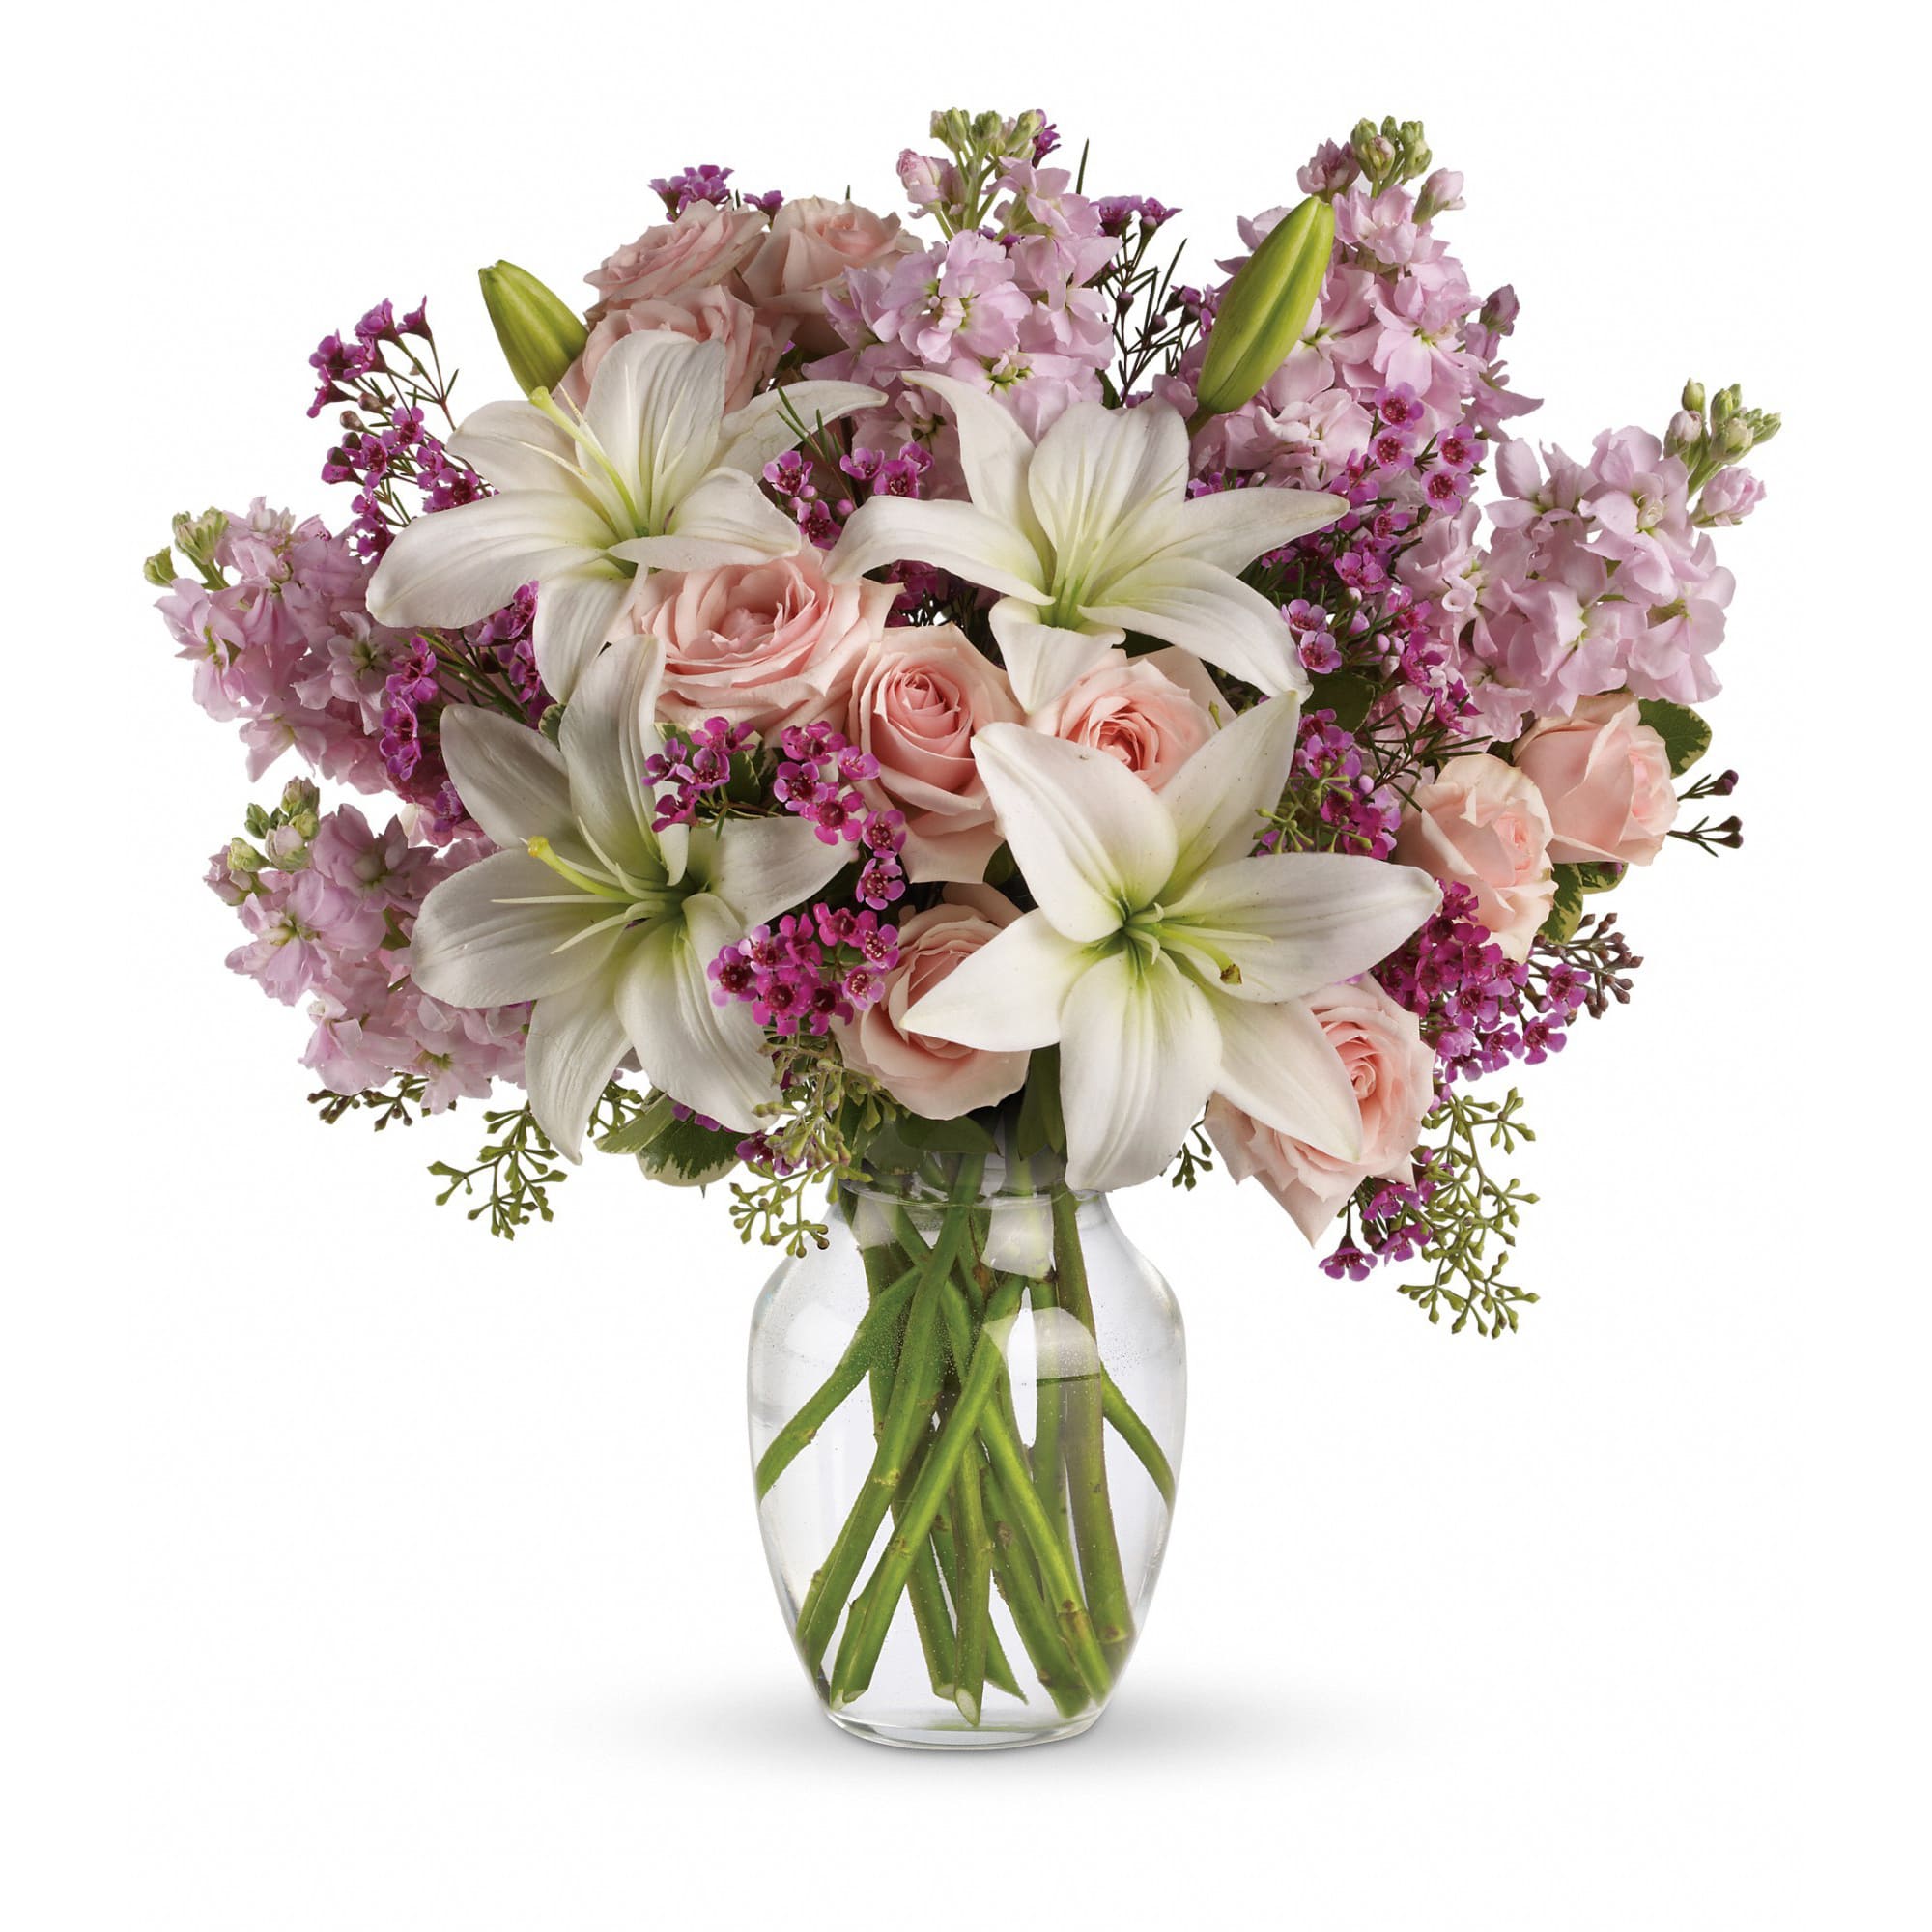 Teleflora's Blossoming Romance - Love is in the air. Or if it isn't, it will be when you surprise her with a gorgeous array of light pink spray roses, fragrant white lilies and other favorites in a sparkling glass vase. You know when she'll love it the most? When it's a total surprise. 